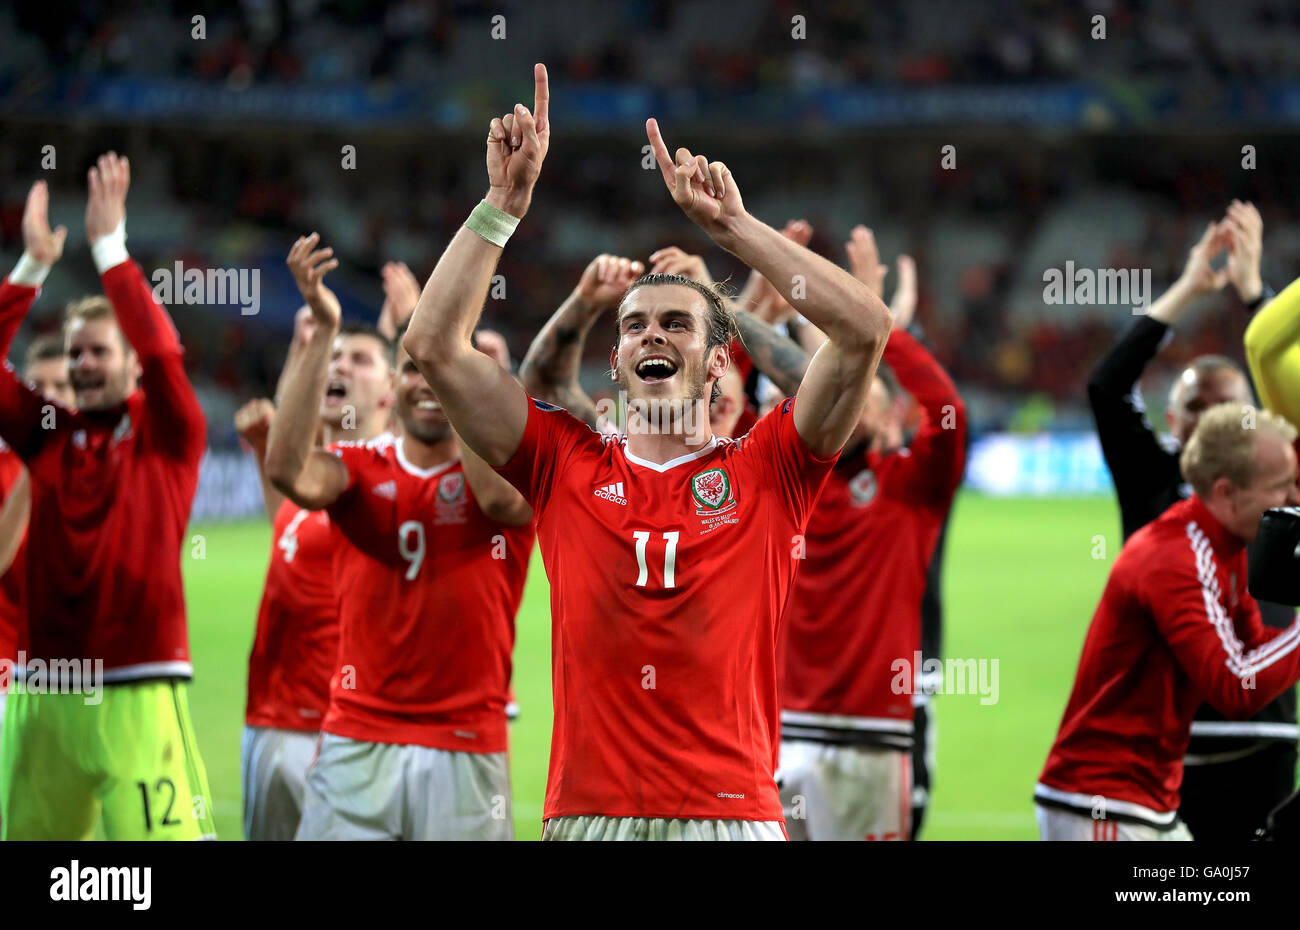 Wales' Gareth Bale celebrates victory in the UEFA Euro 2016, quarter final match at the Stade Pierre Mauroy, Lille. Stock Photo